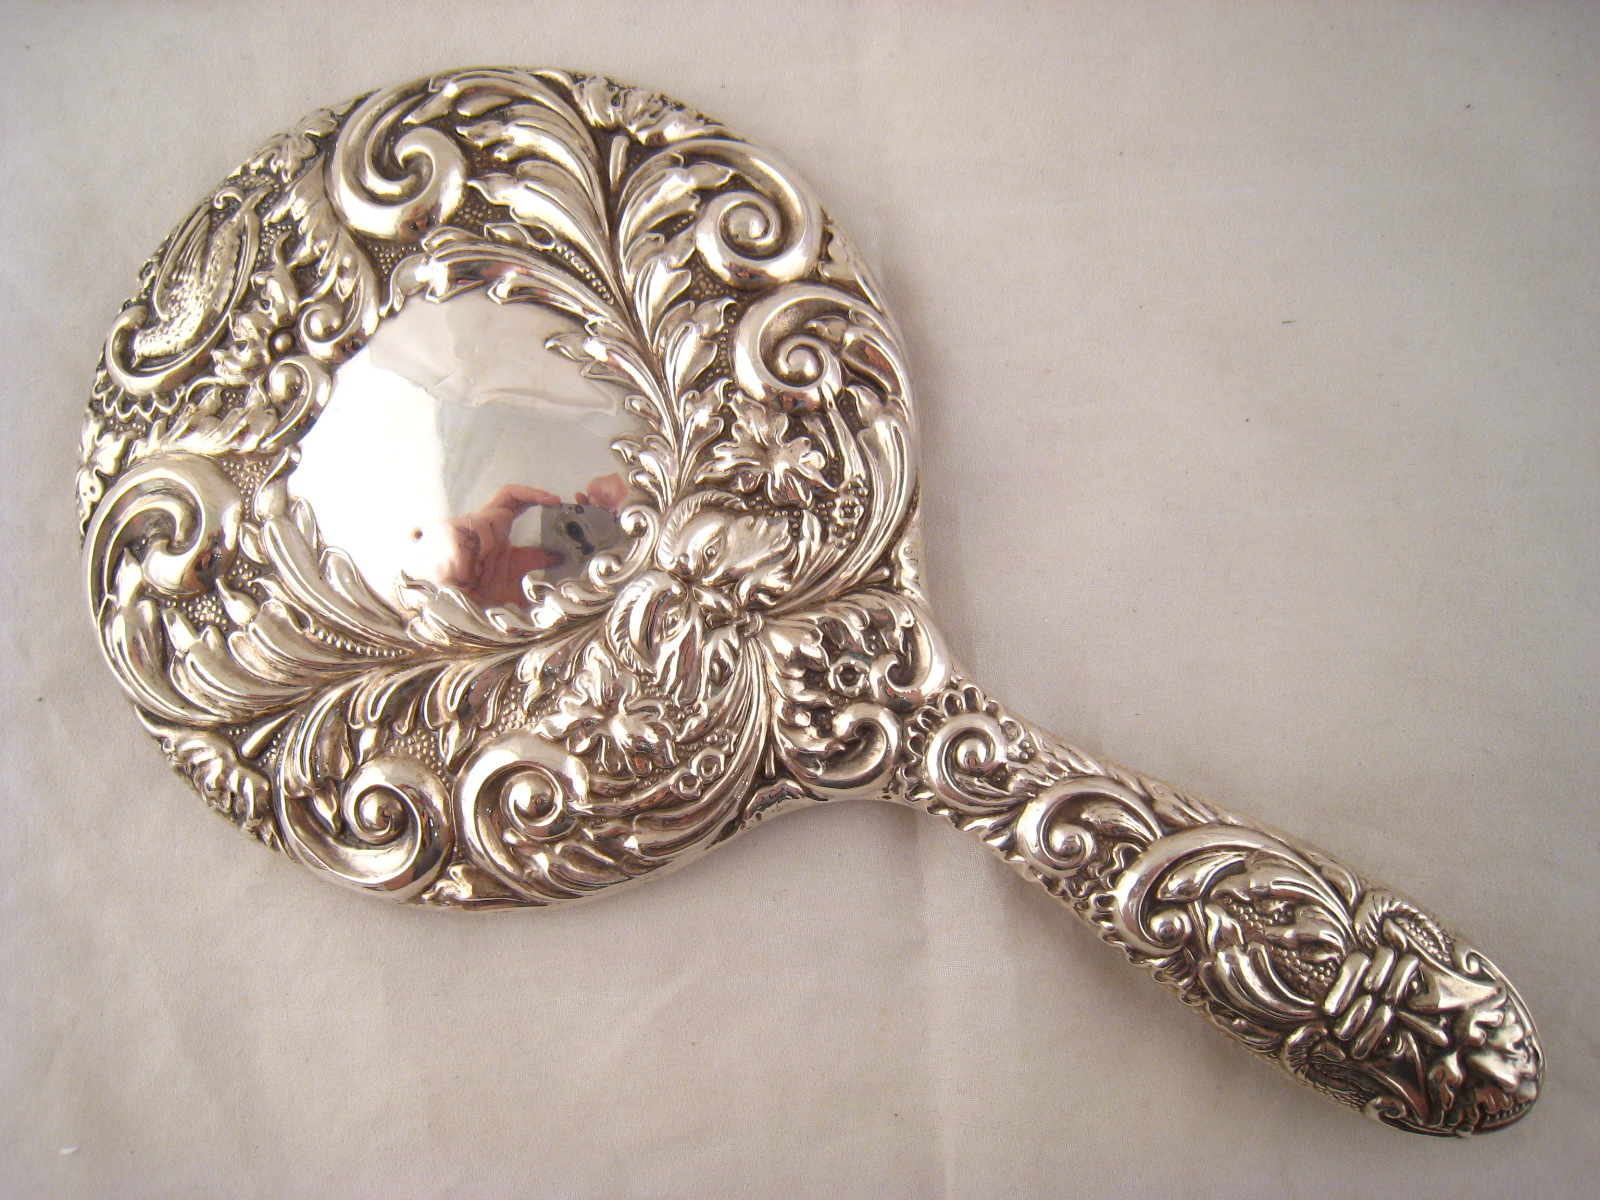 An ornately embossed silver backed hand mirror, Birmingham 1996.